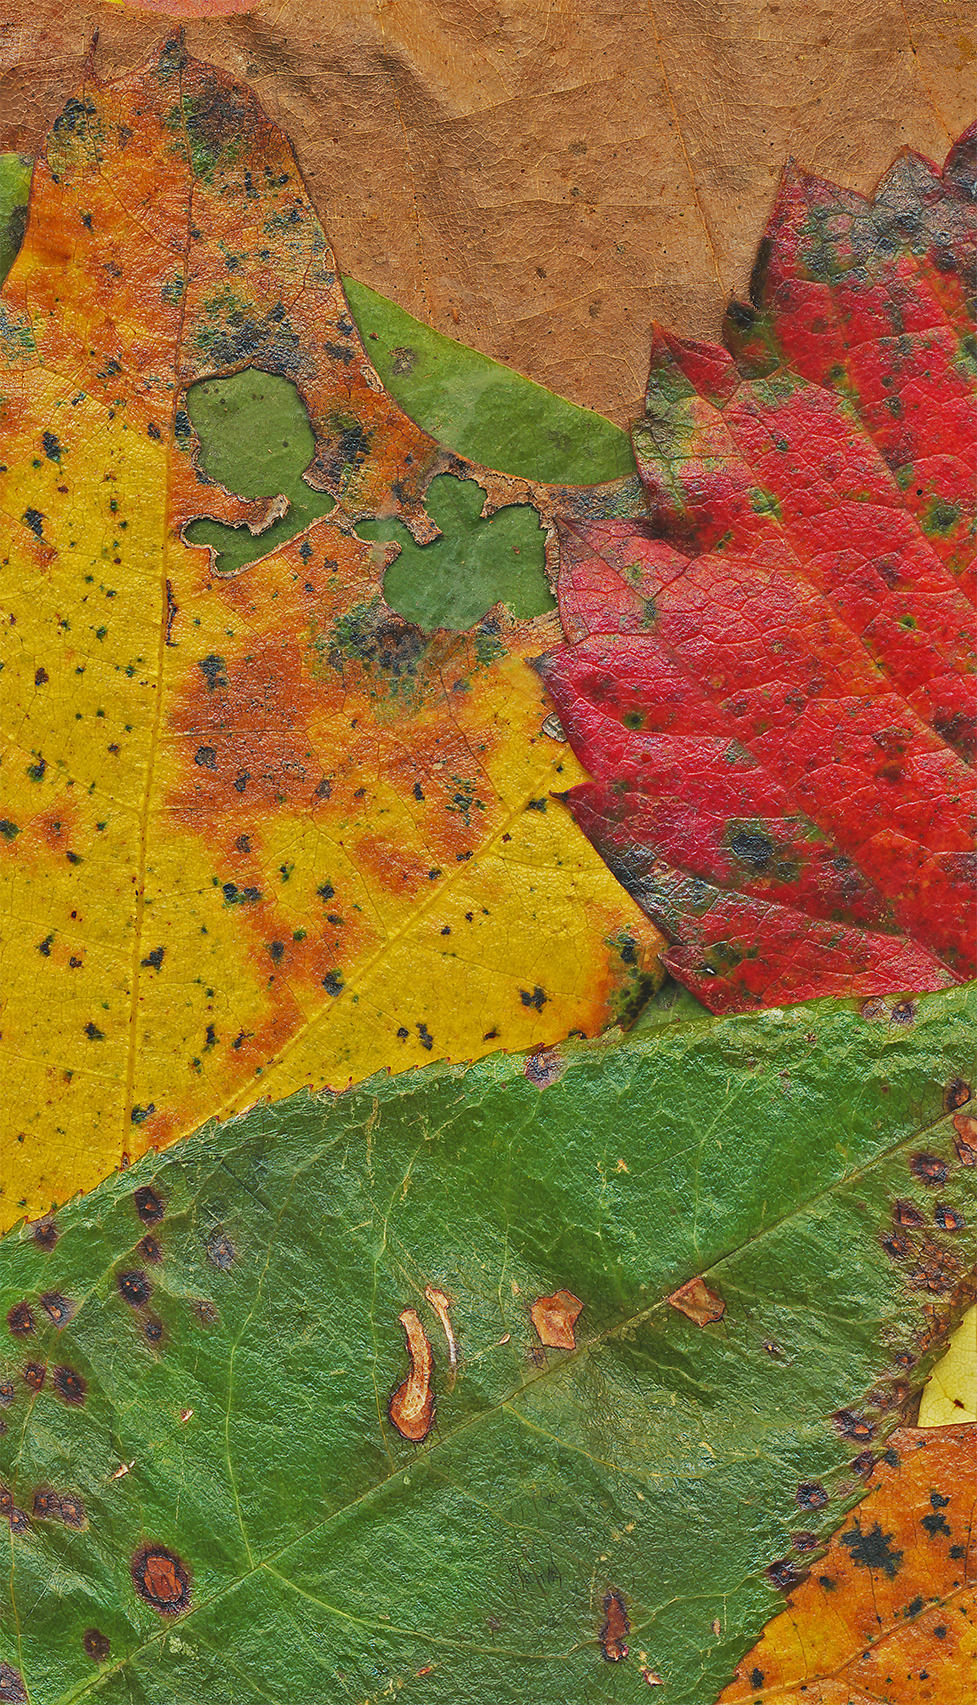 Several early autumn leaves found on the ground and gathered in the Ozark Highlands of Arkansas to make a palette of color and shape